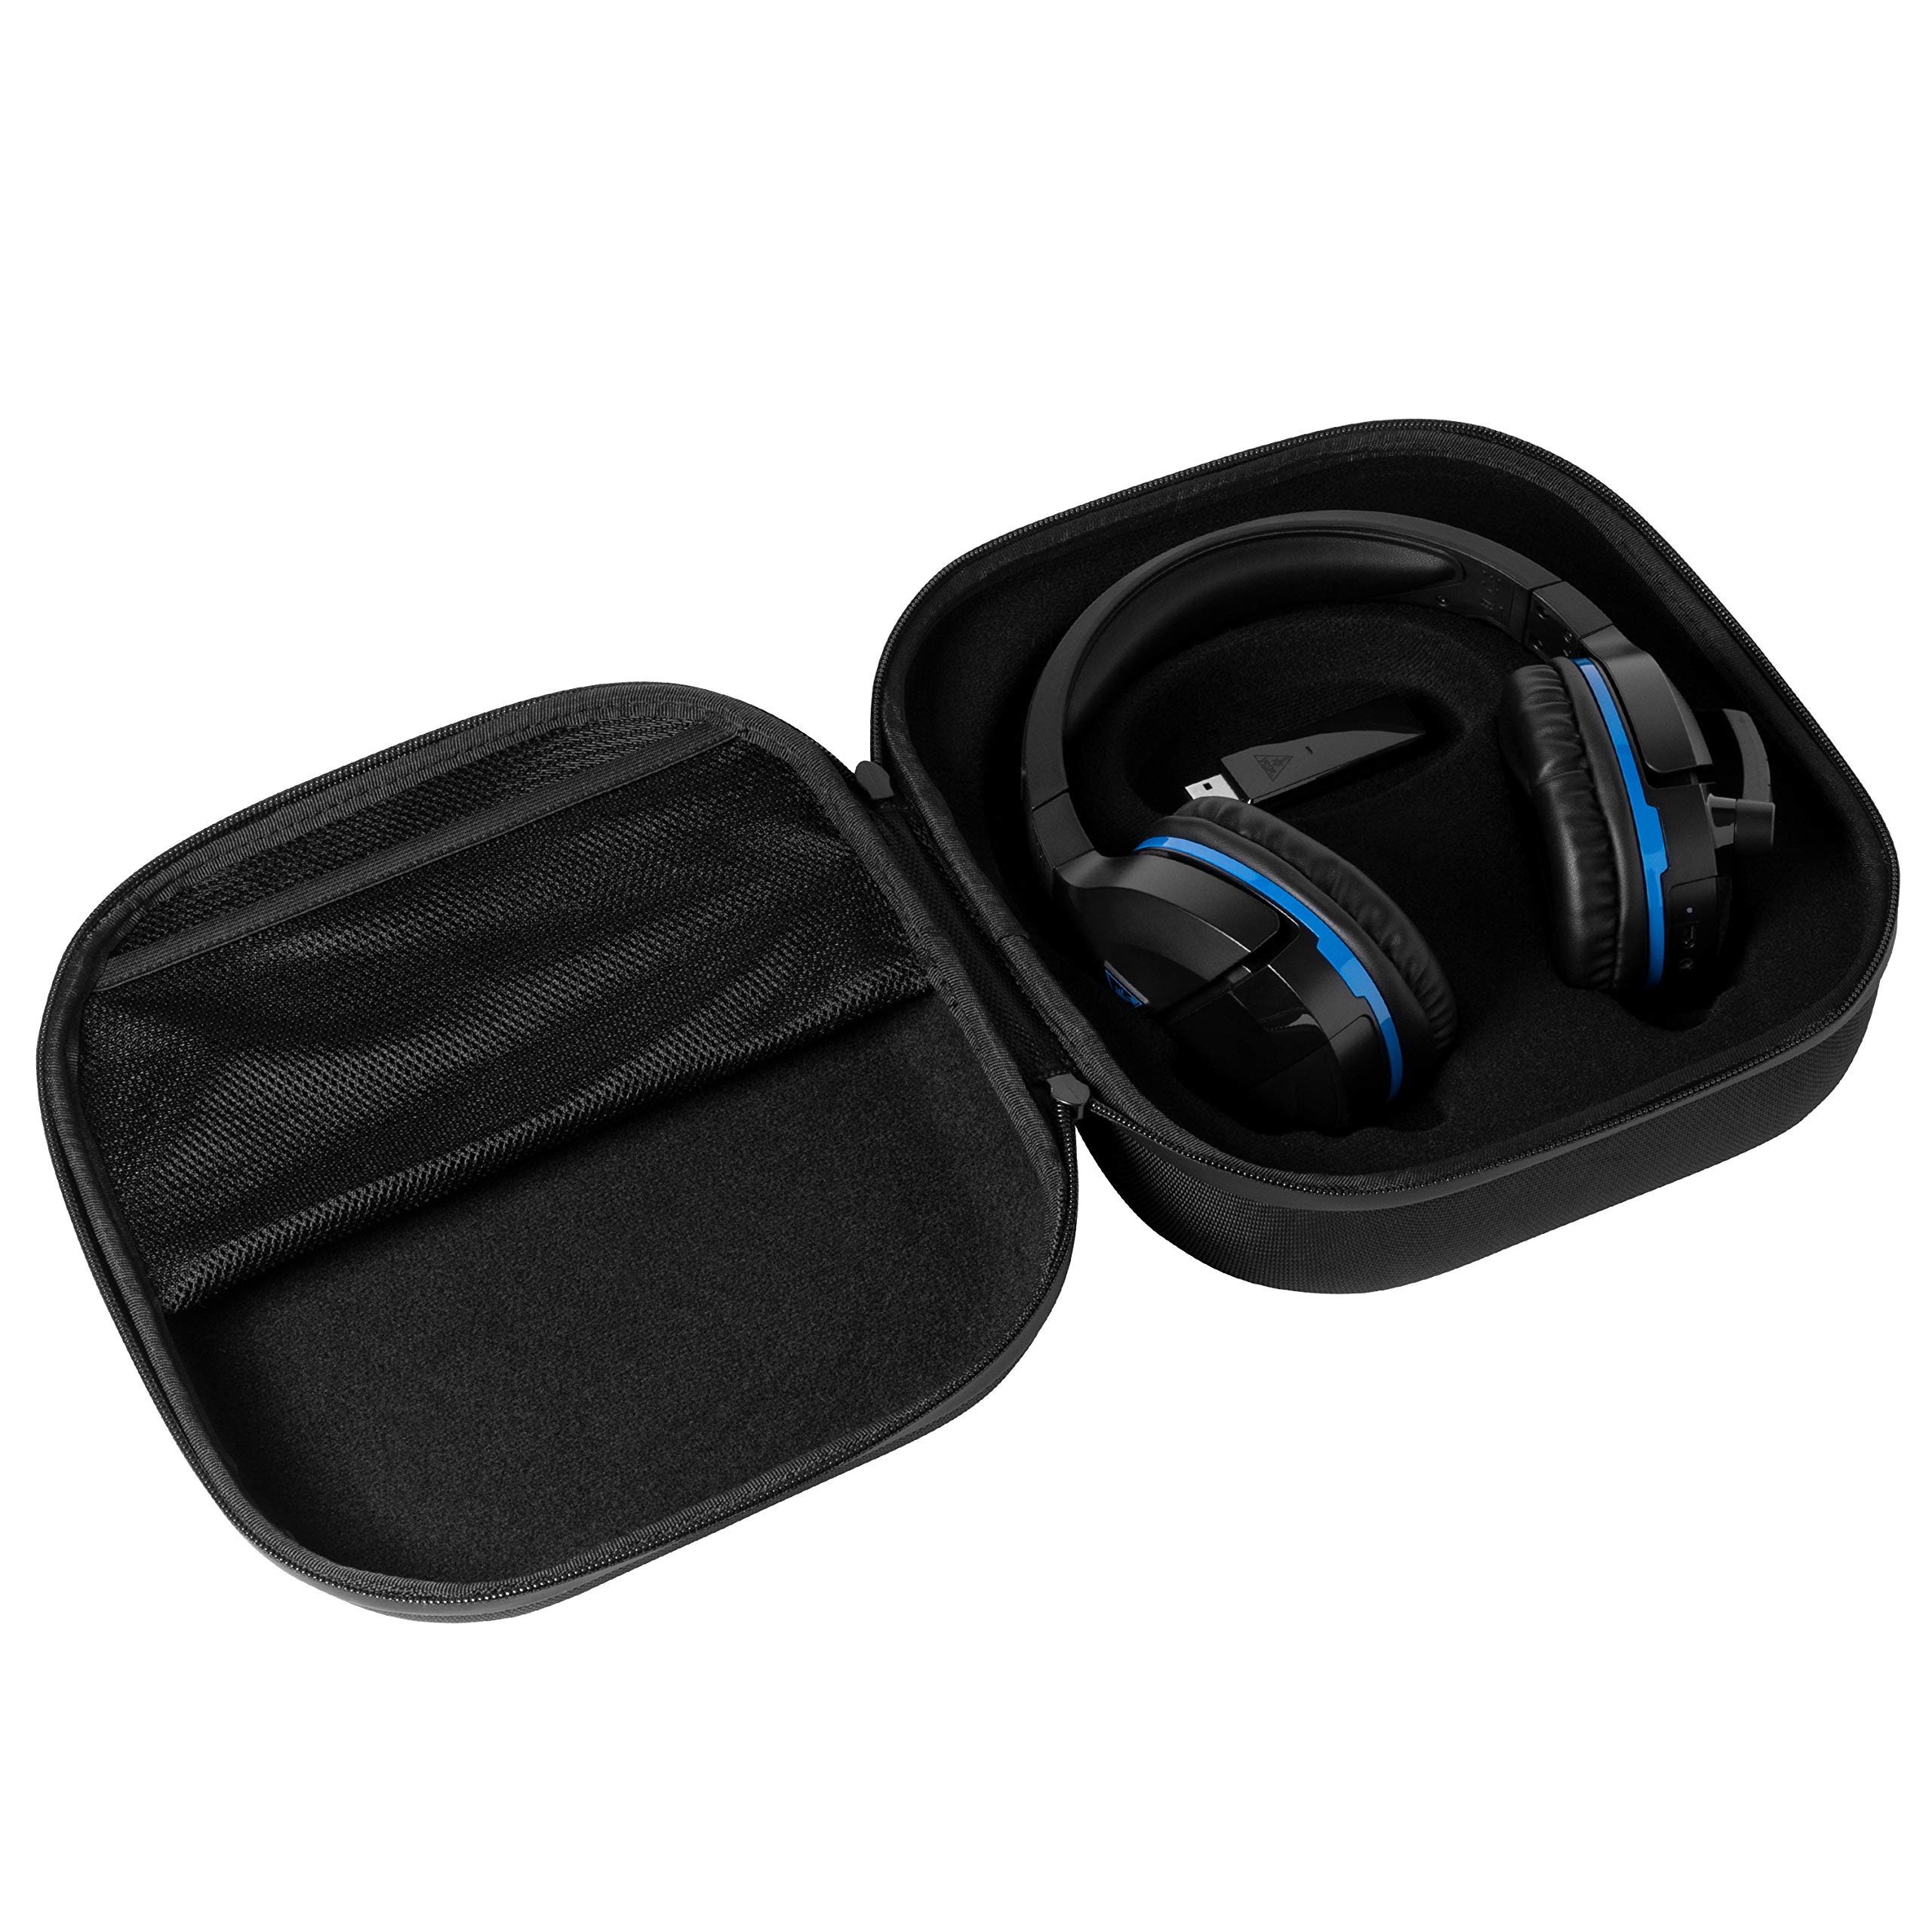 Turtle Beach Ear Force HC1 Headset Case – Durable Hard-Shell Case, Universal Interior Headset Cushioning, Storage for Home & Travel with Interior Mesh Pocket for Accessories